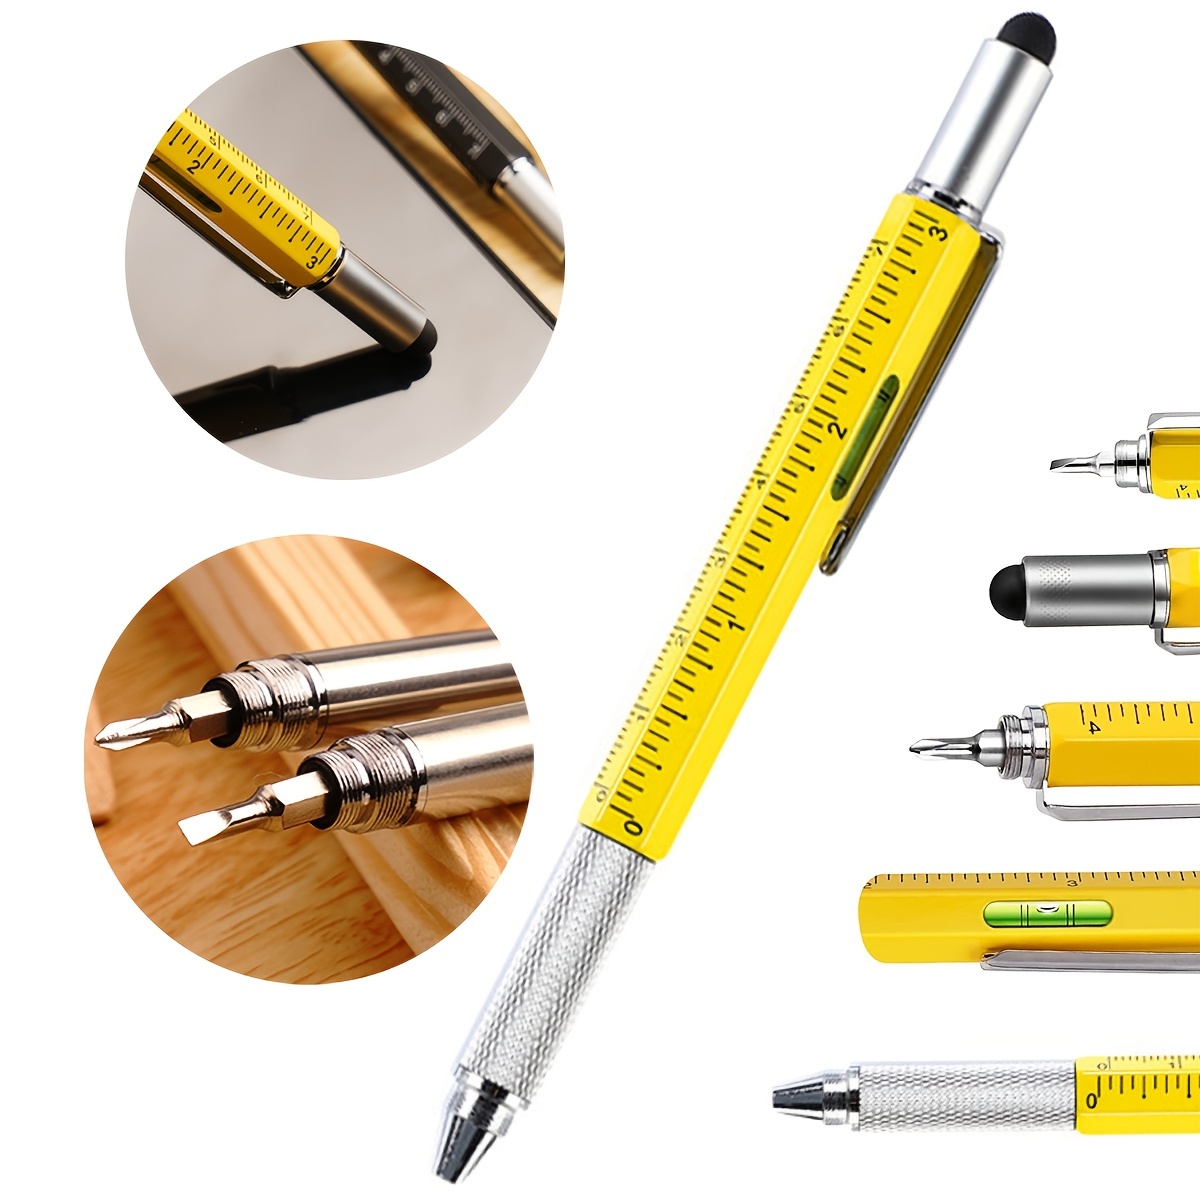 Mini stylo multifonction, 6 in1 stylo multifonction, Gadget